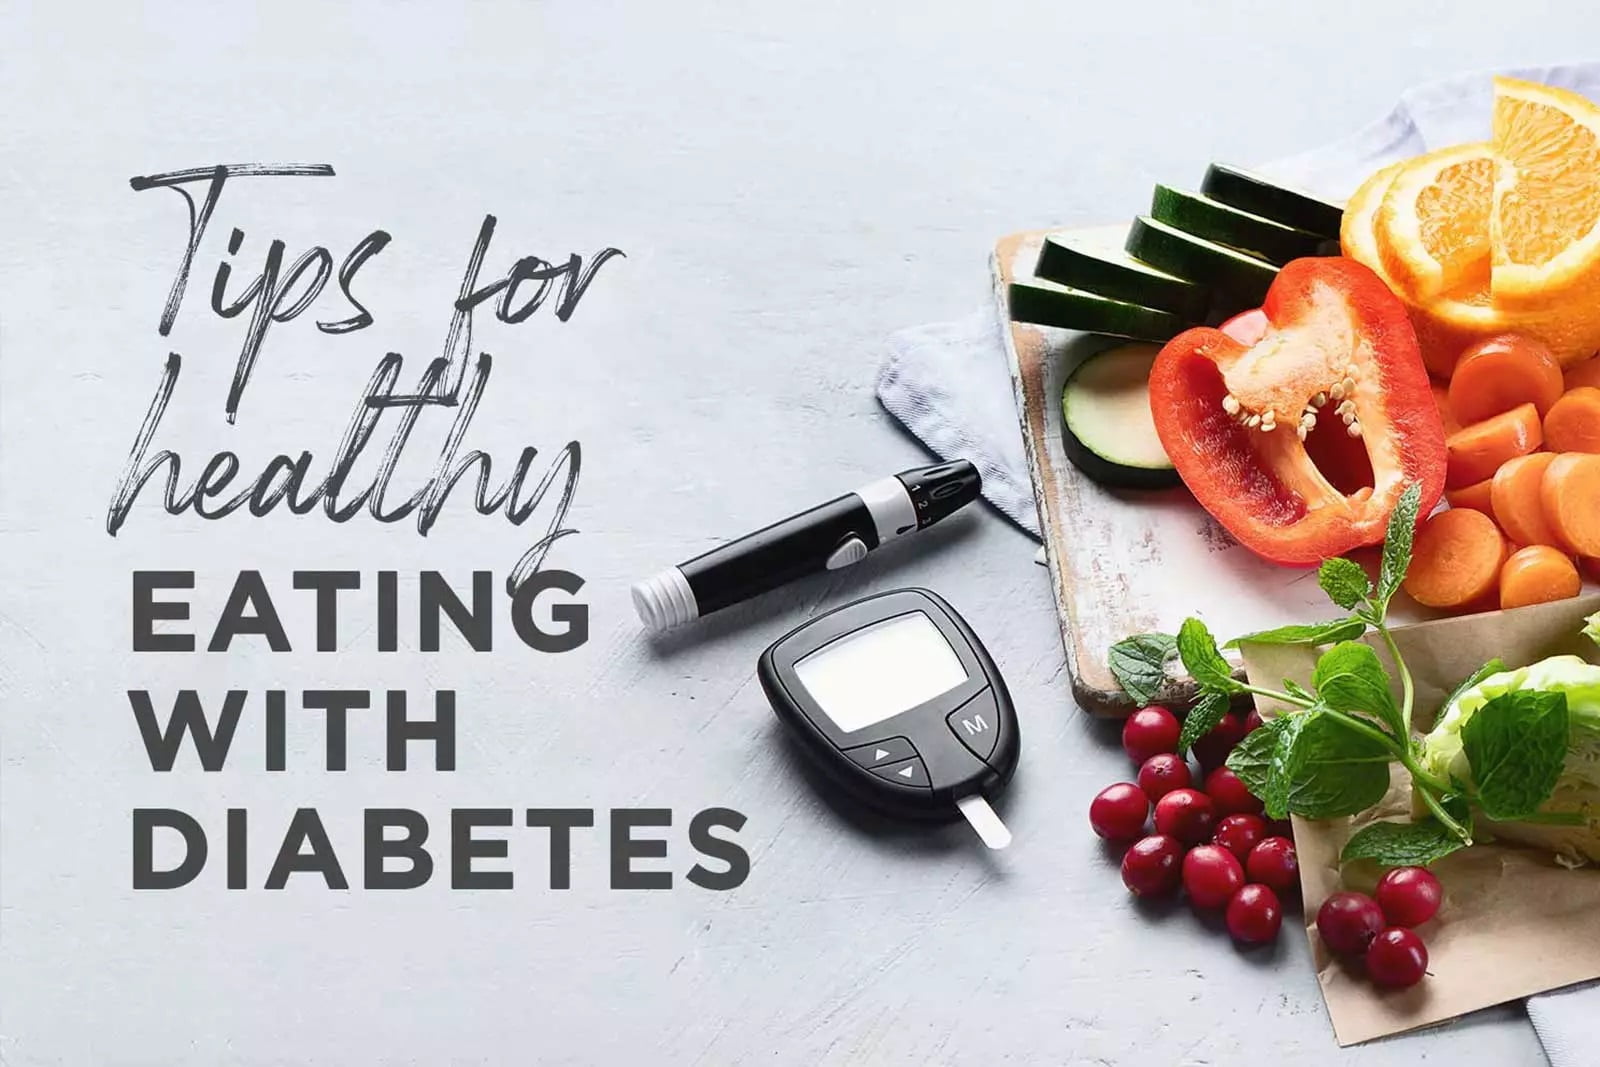 Tips for healthy eating with diabetes